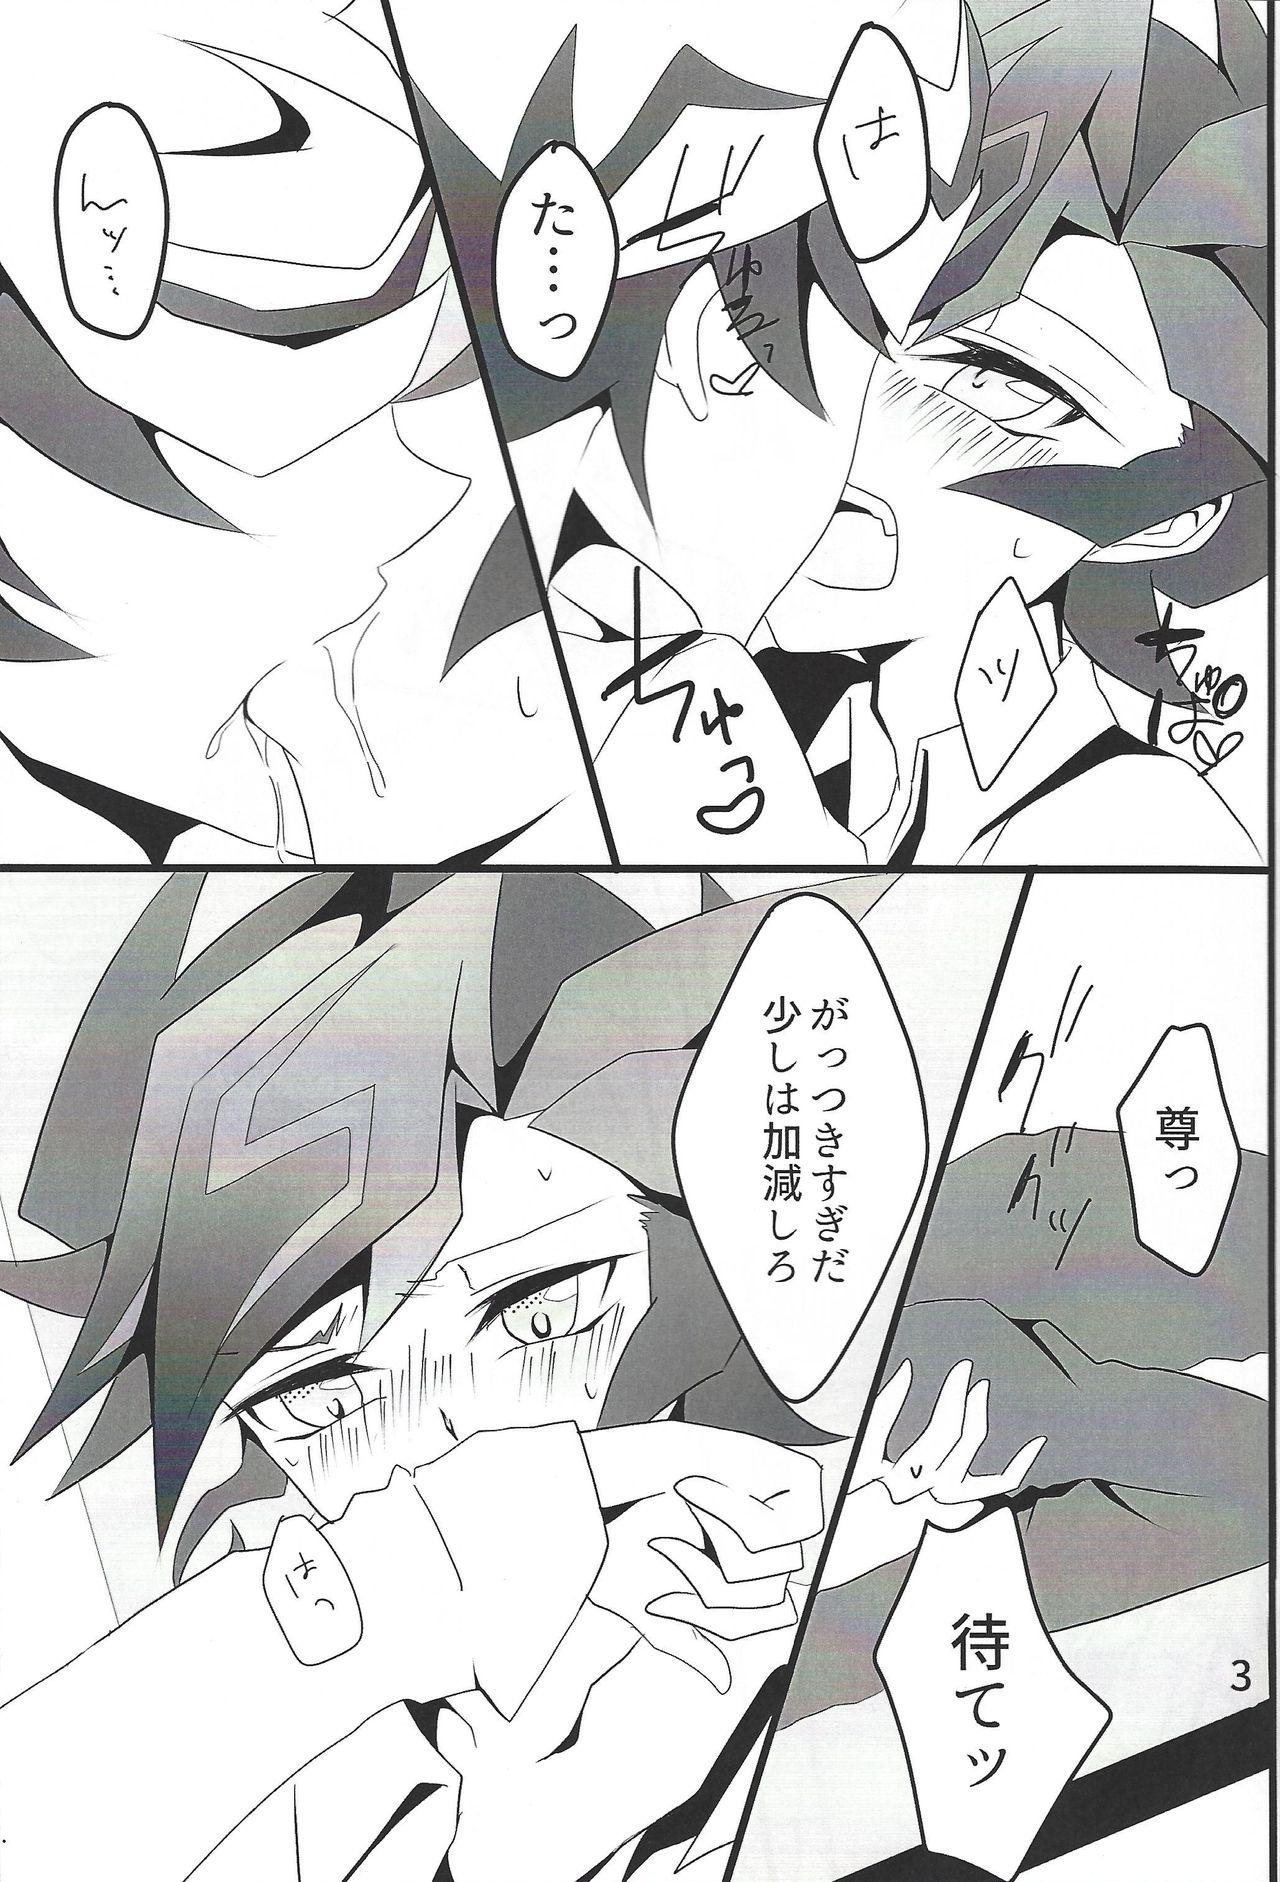 Phat if - Yu-gi-oh vrains Speculum - Page 4